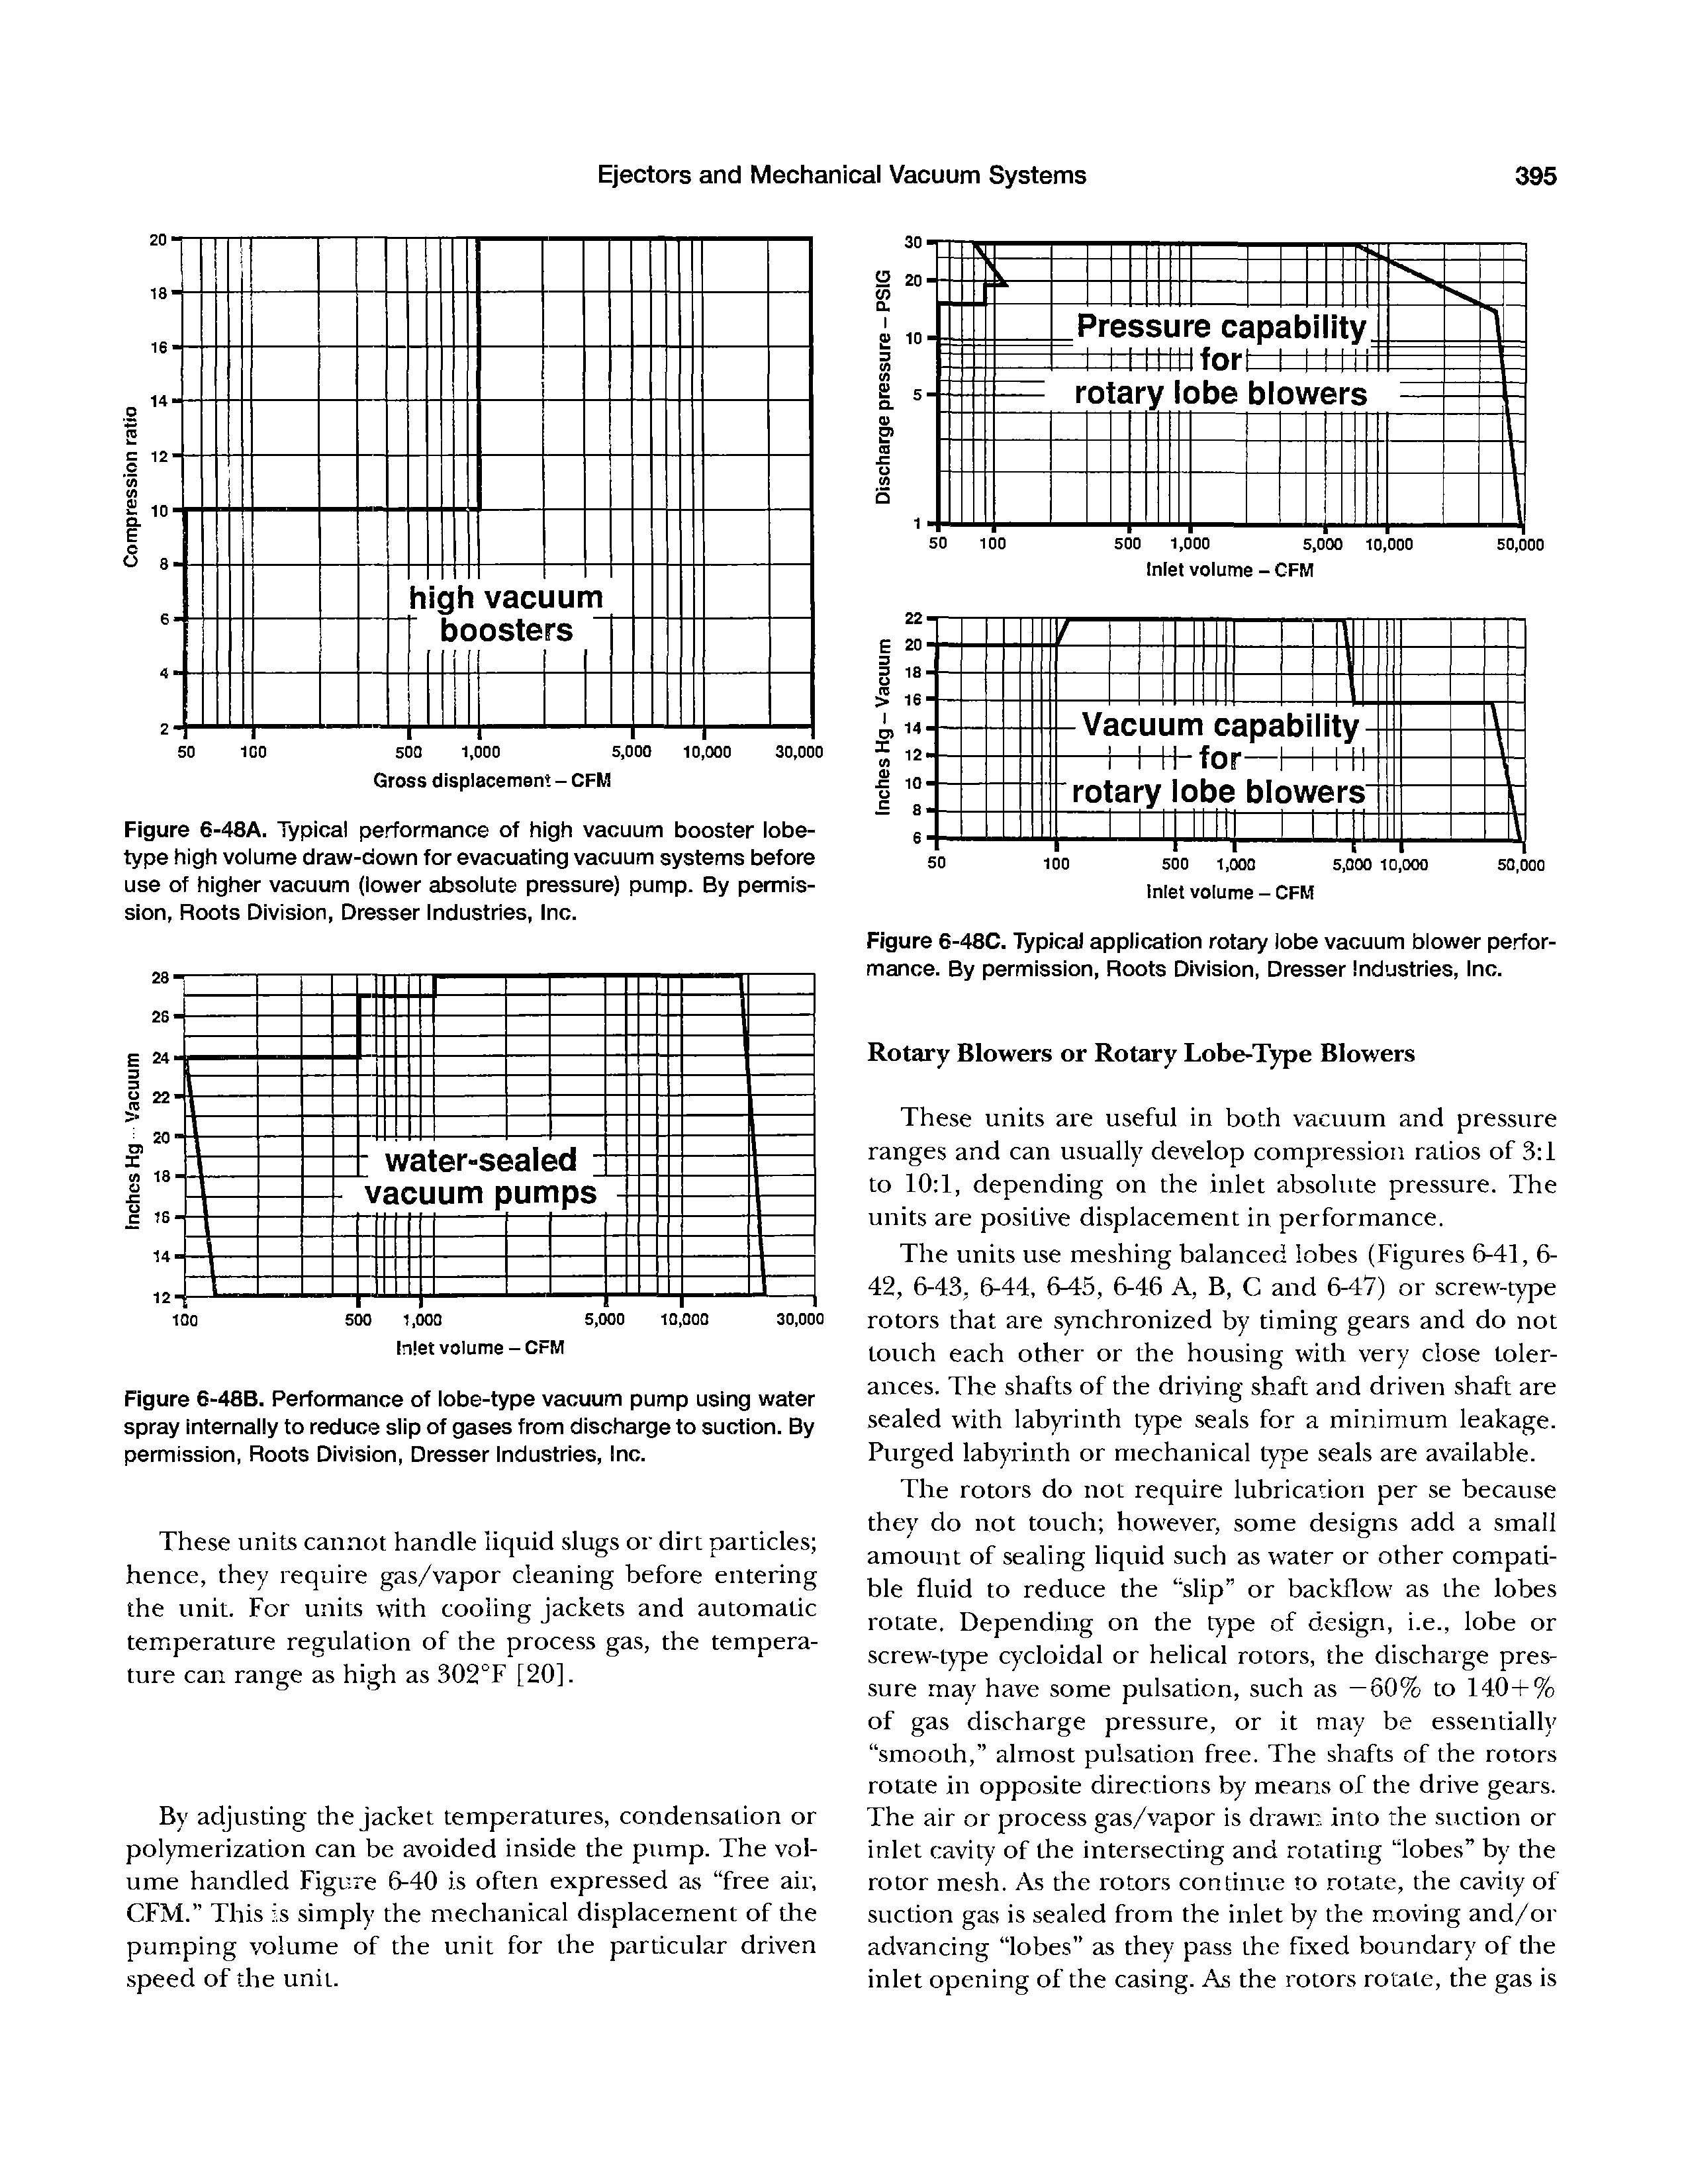 Figure 6-48A. Typical performance of high vacuum booster lobe-type high volume draw-down for evacuating vacuum systems before use of higher vacuum (lower absolute pressure) pump. By permission, Roots Division, Dresser Industries, Inc.